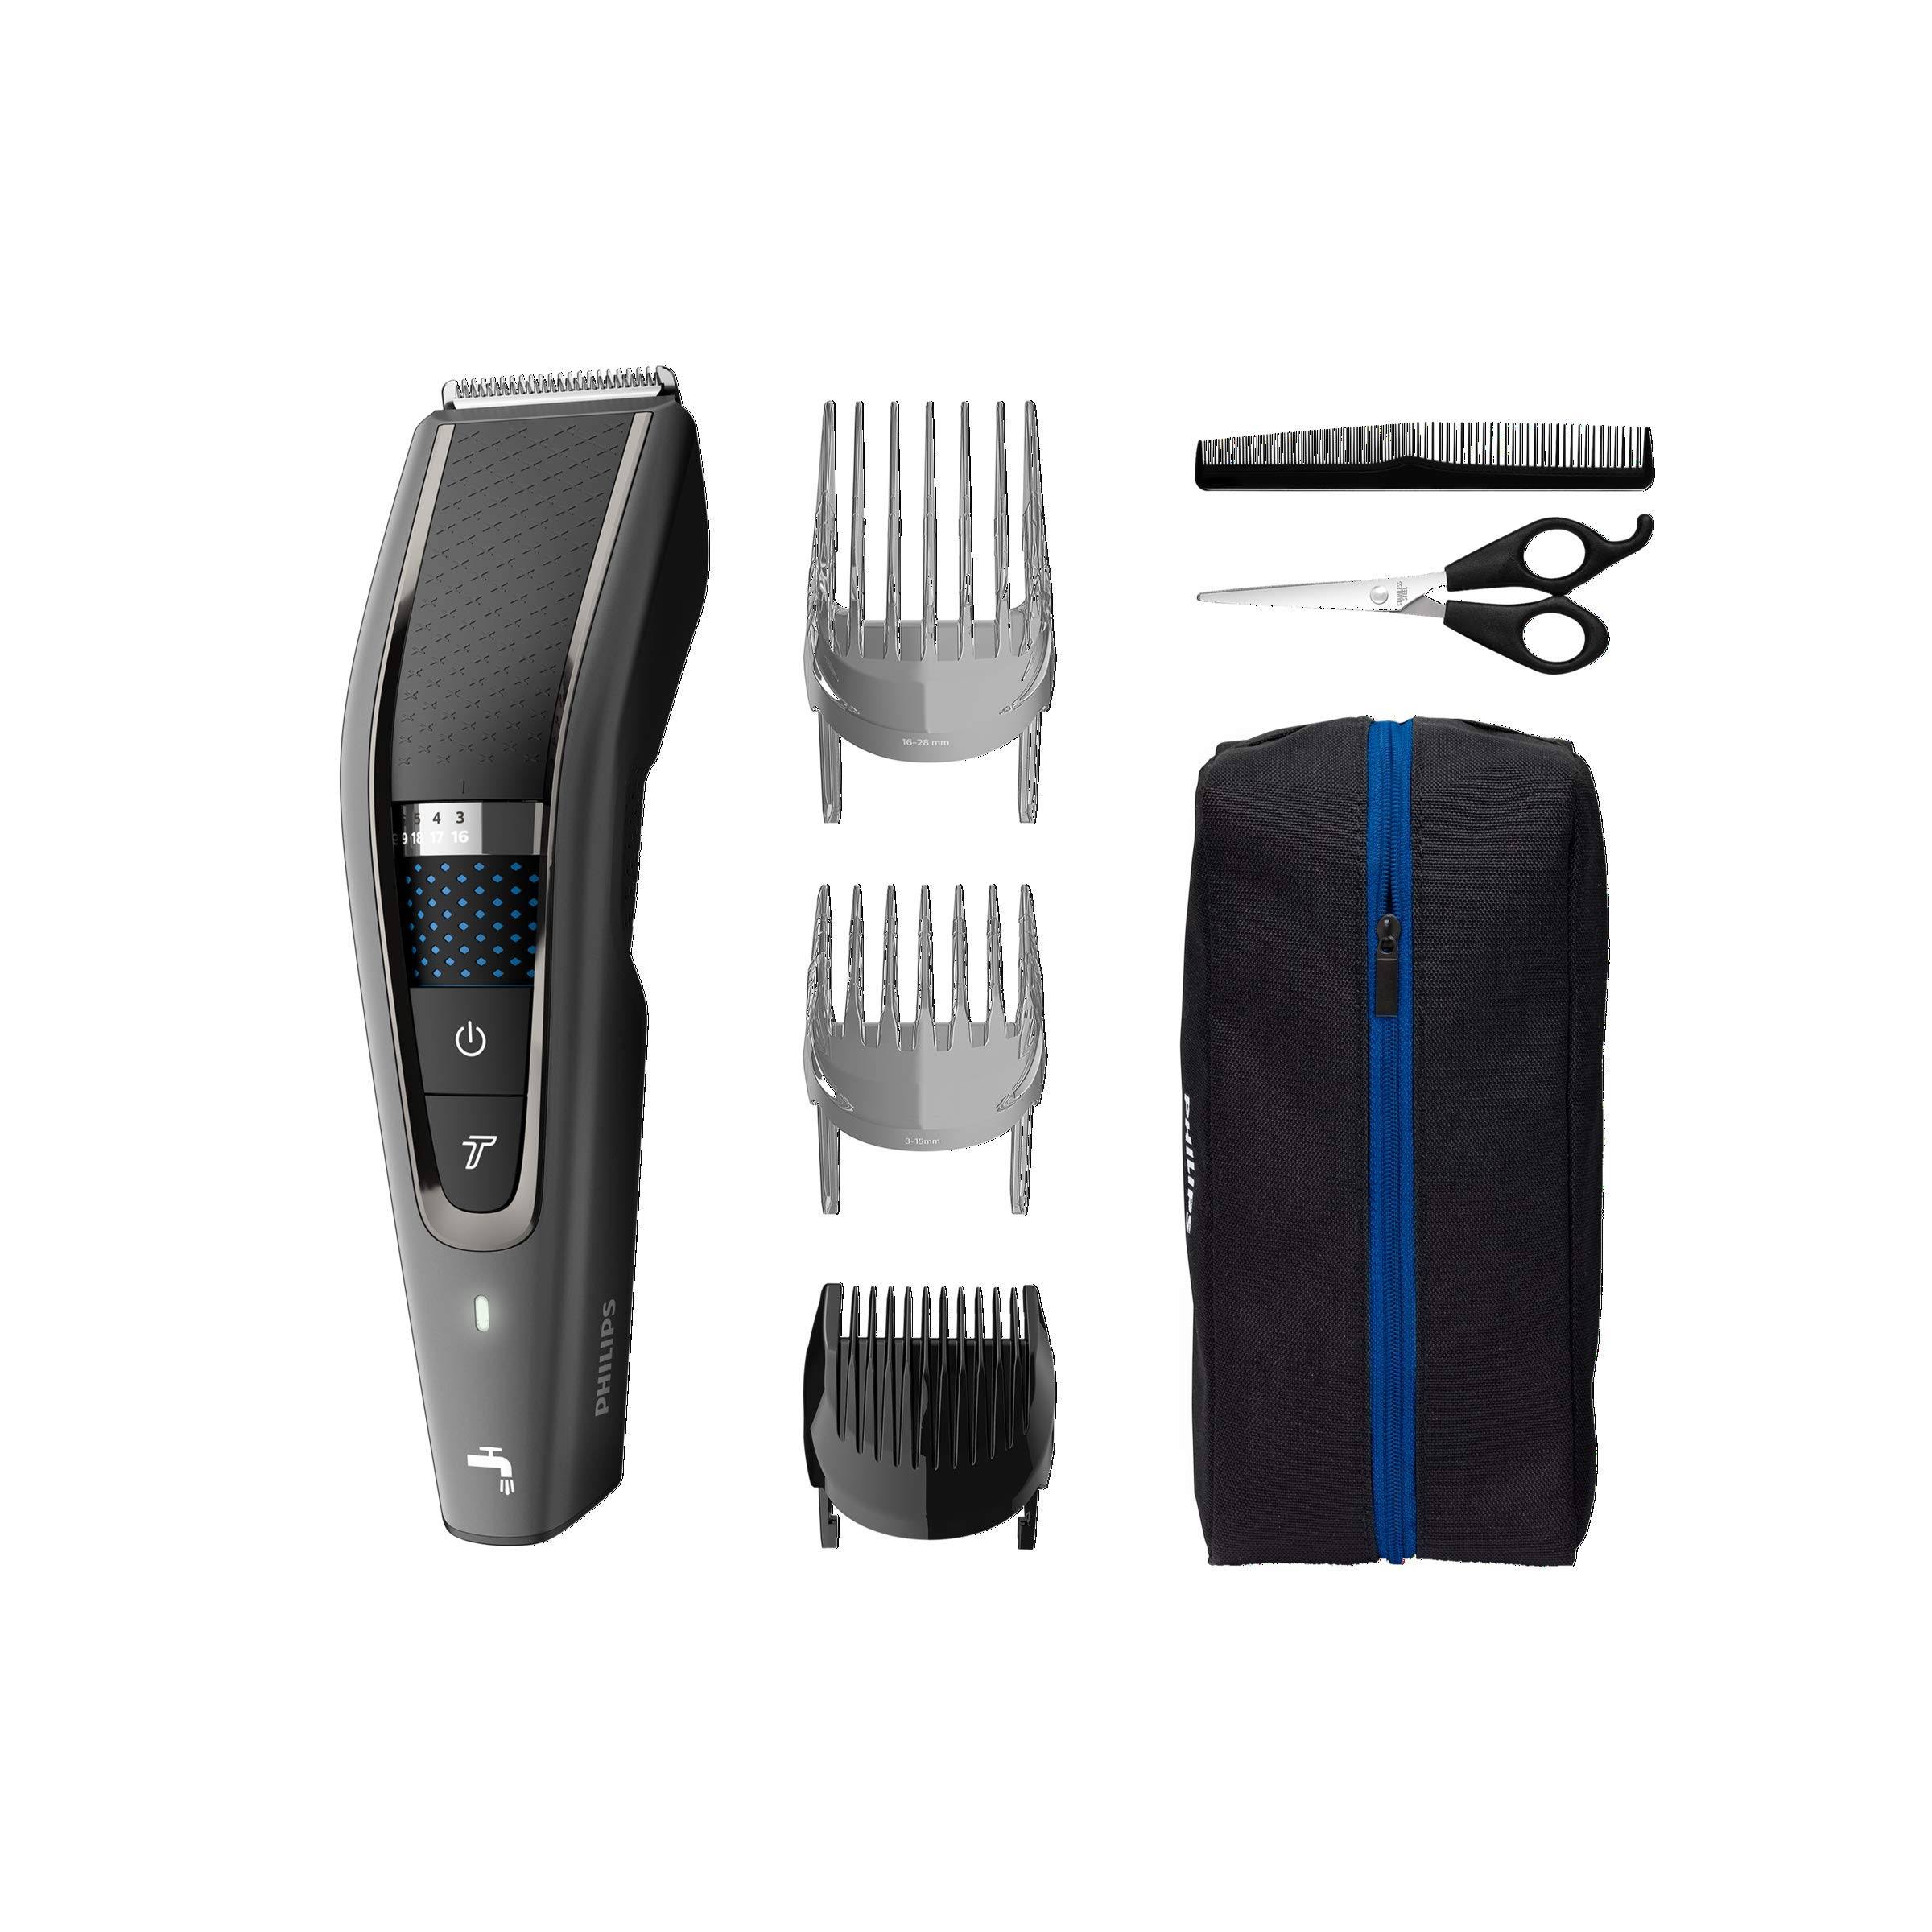 Philips Hairclipper Series 7000, HC7650/14